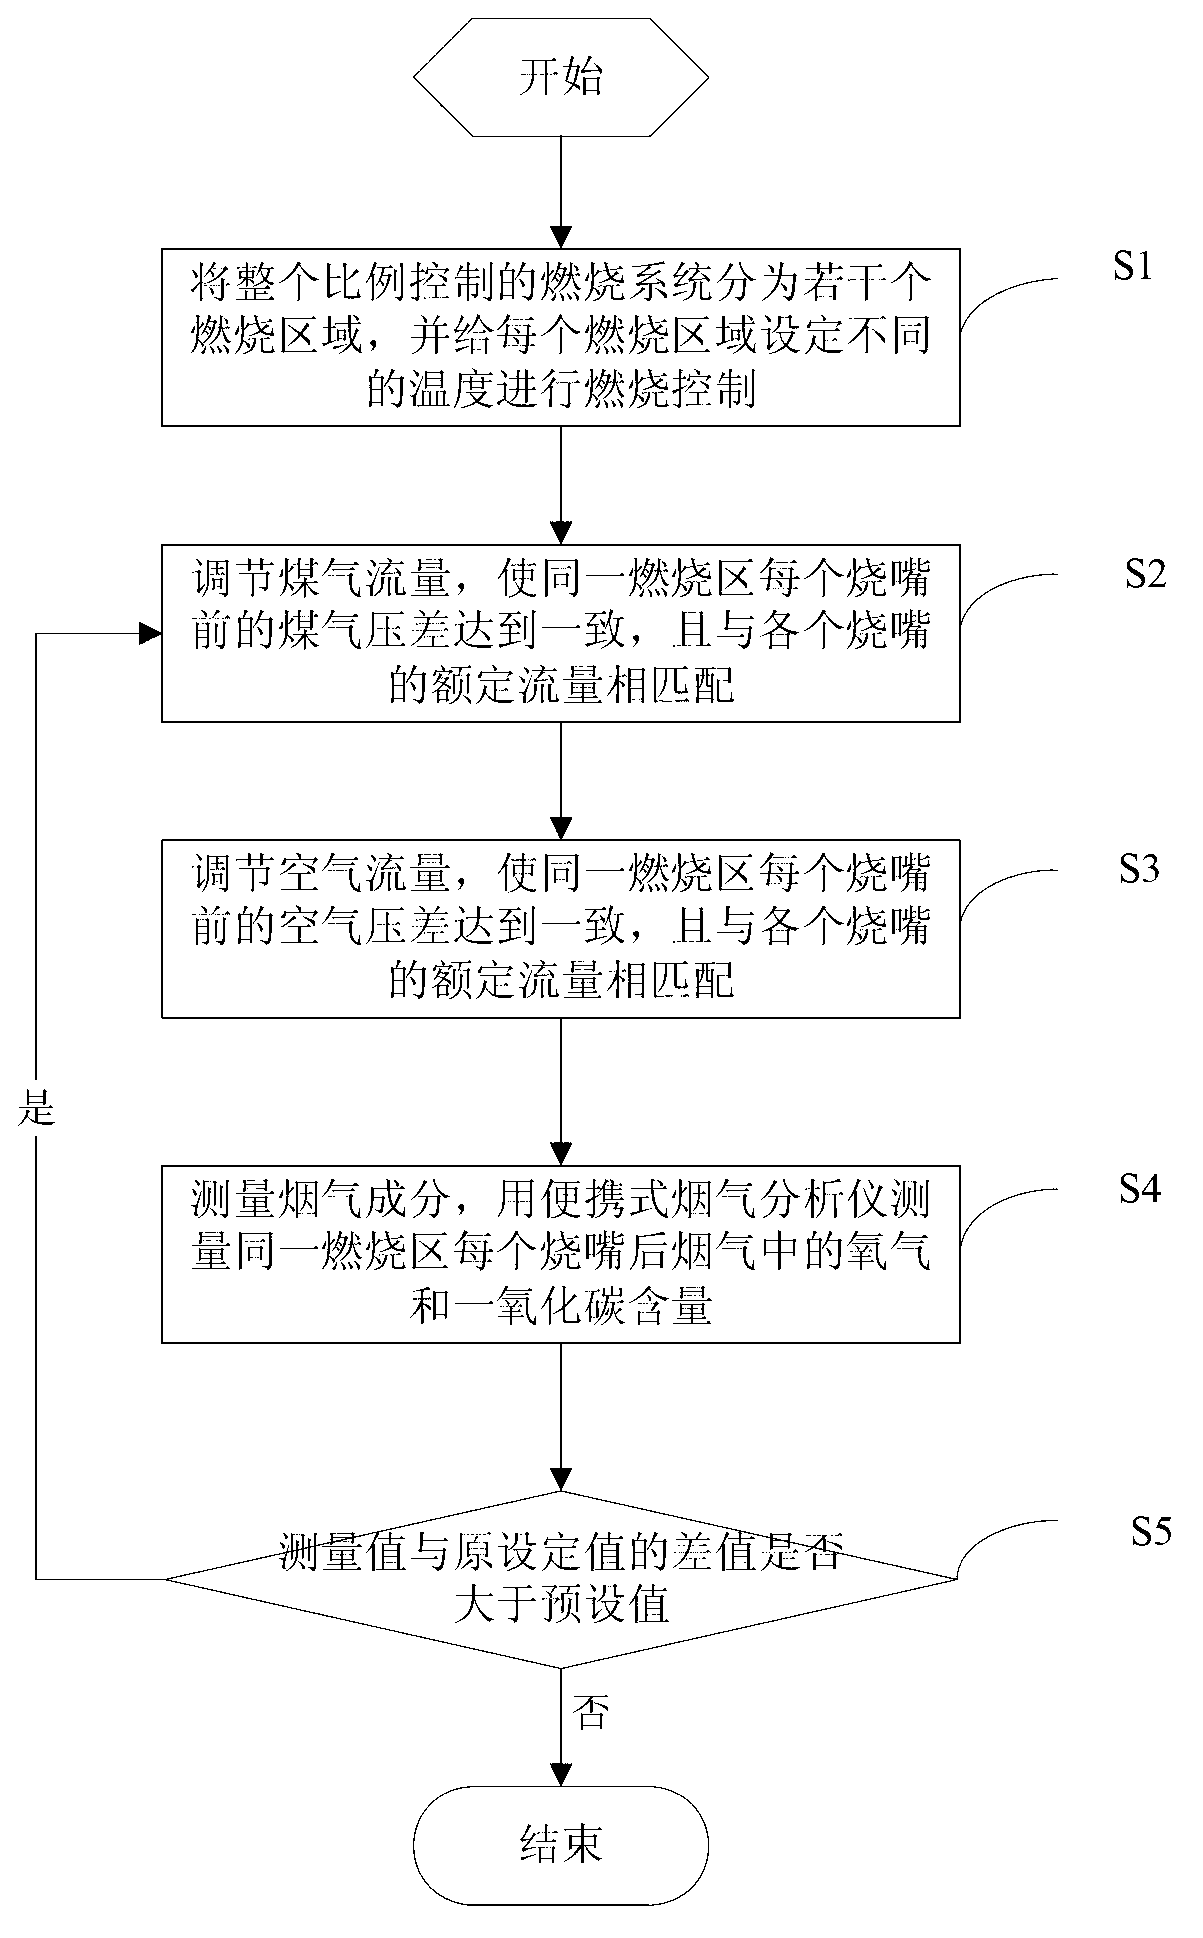 Adjusting and optimizing method of ratio-controlled combustion system